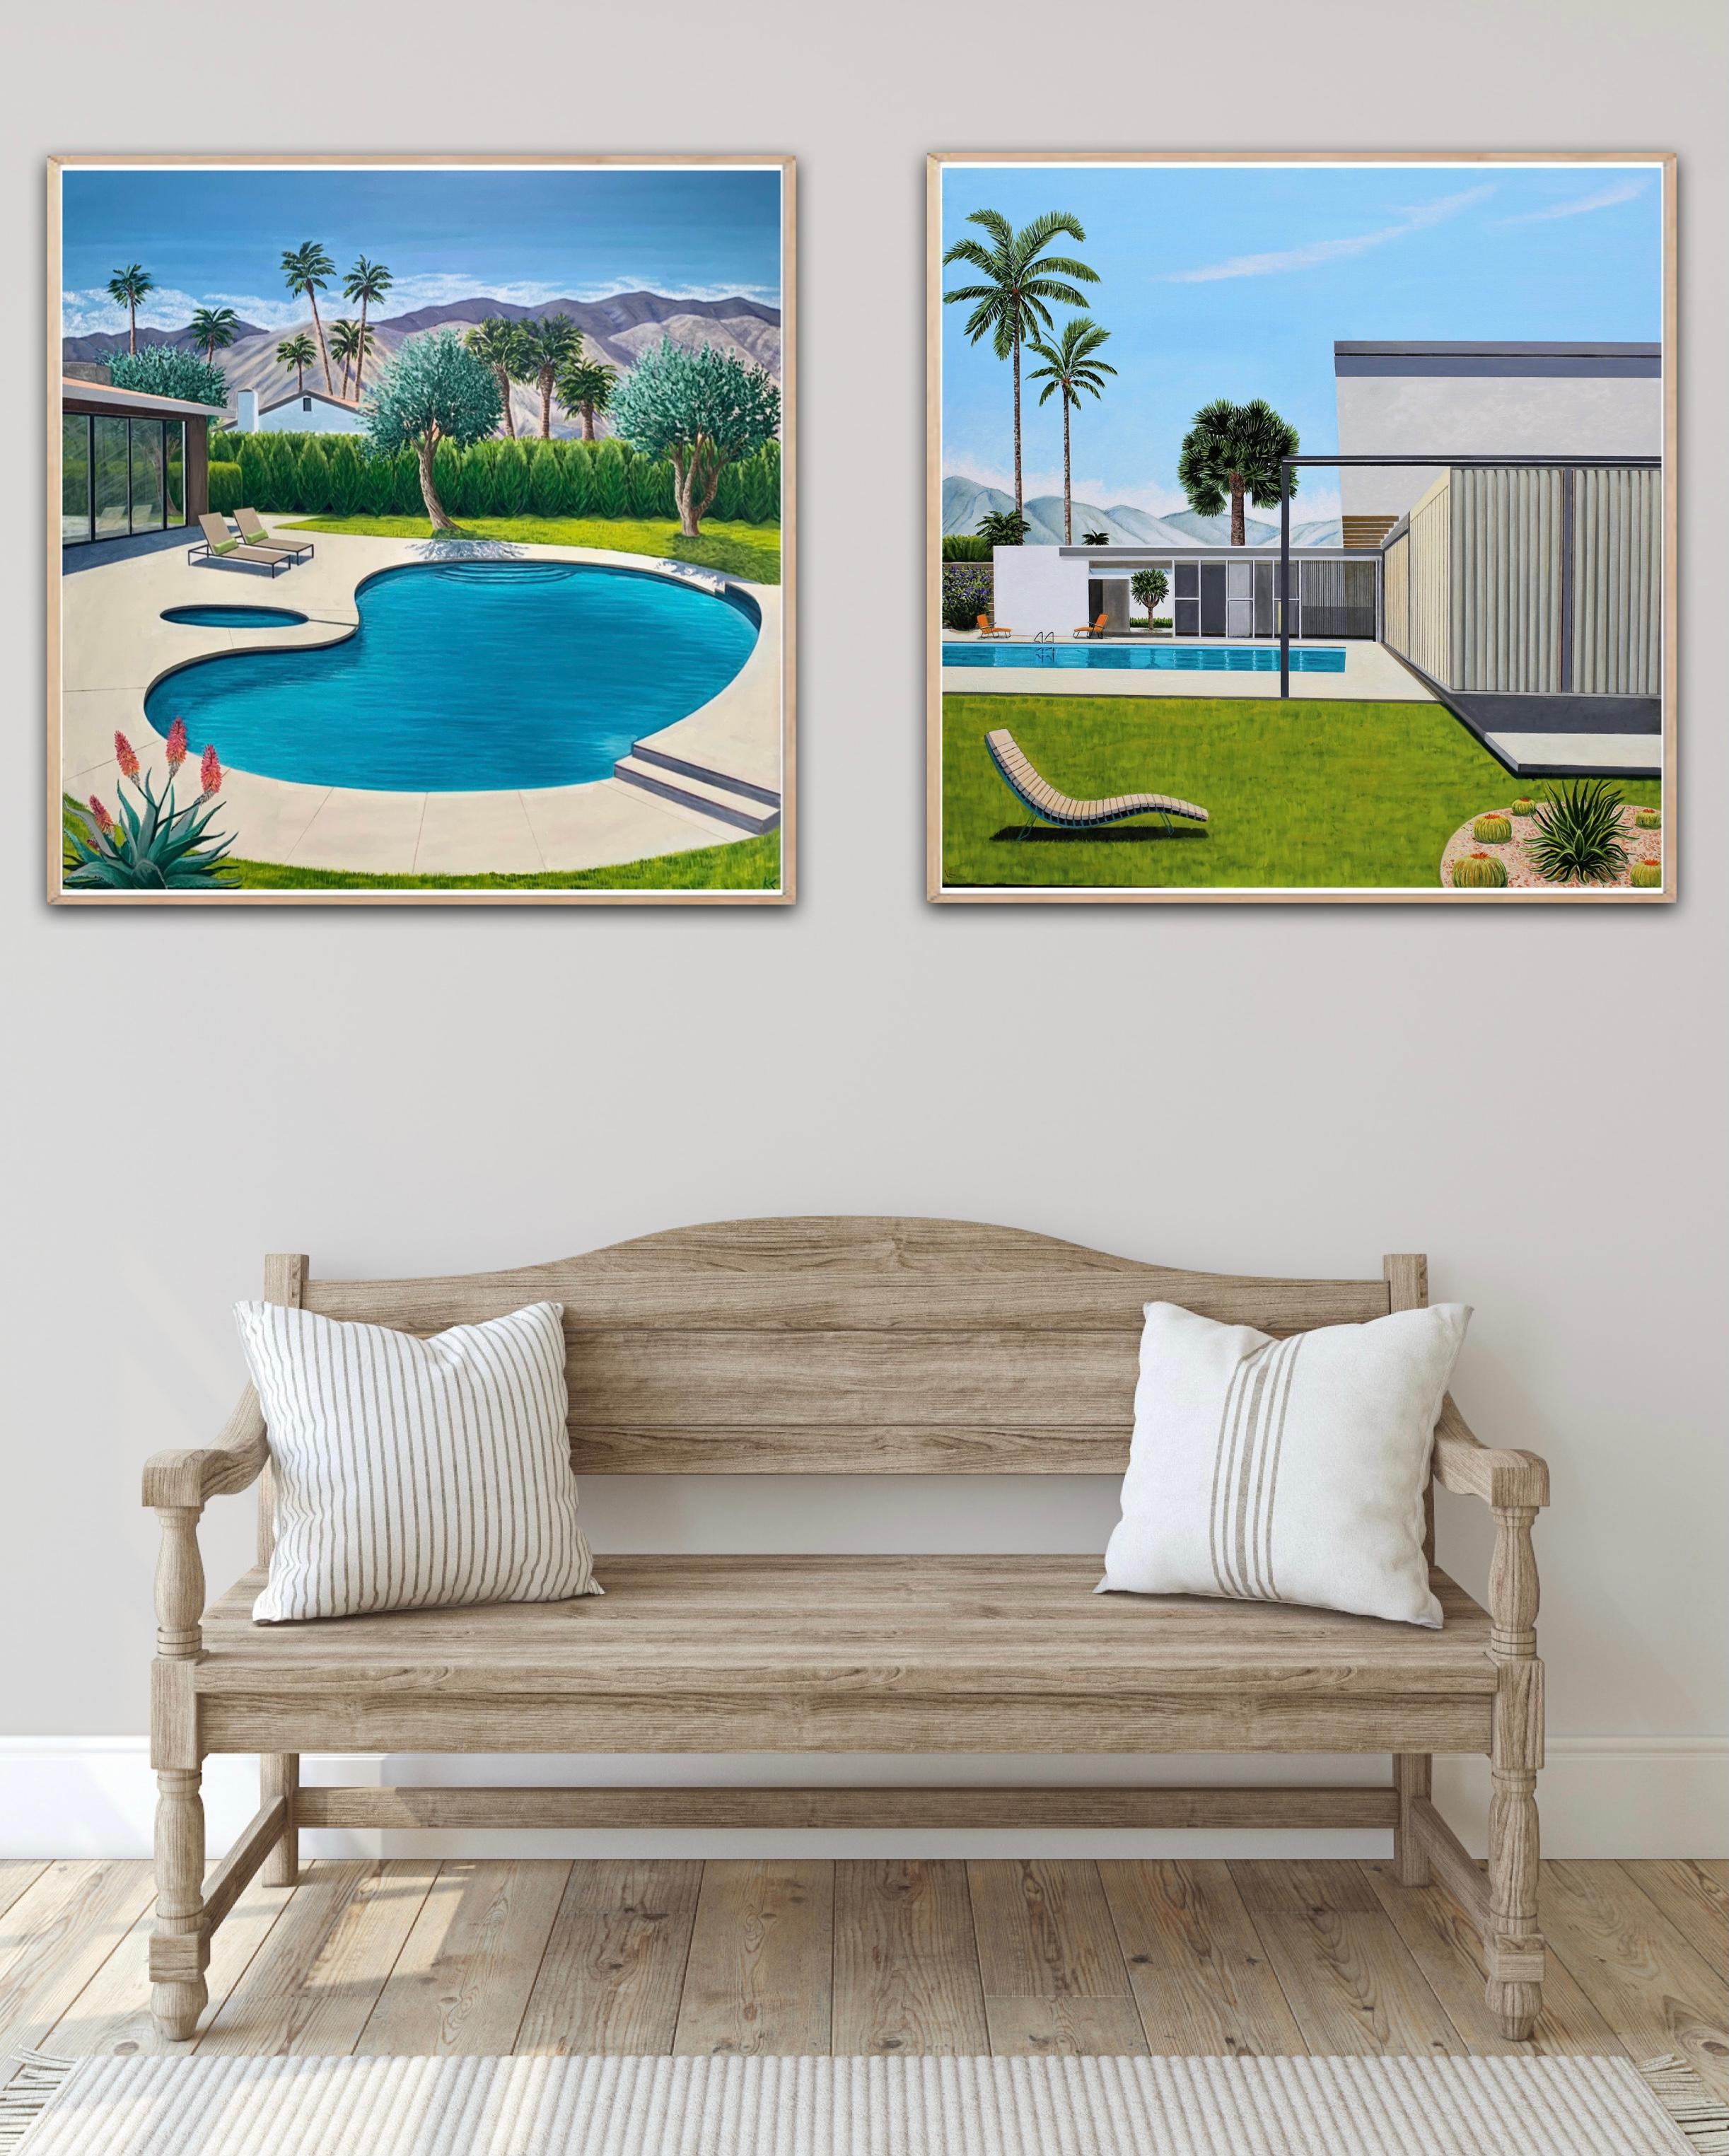 Vila Olivos by Karen Lynn [2021]

original
oil on canvas
Image size: H:100 cm x W:100 cm
Complete Size of Unframed Work: H:100 cm x W:100 cm x D:4cm
Sold Unframed
Please note that insitu images are purely an indication of how a piece may look

This